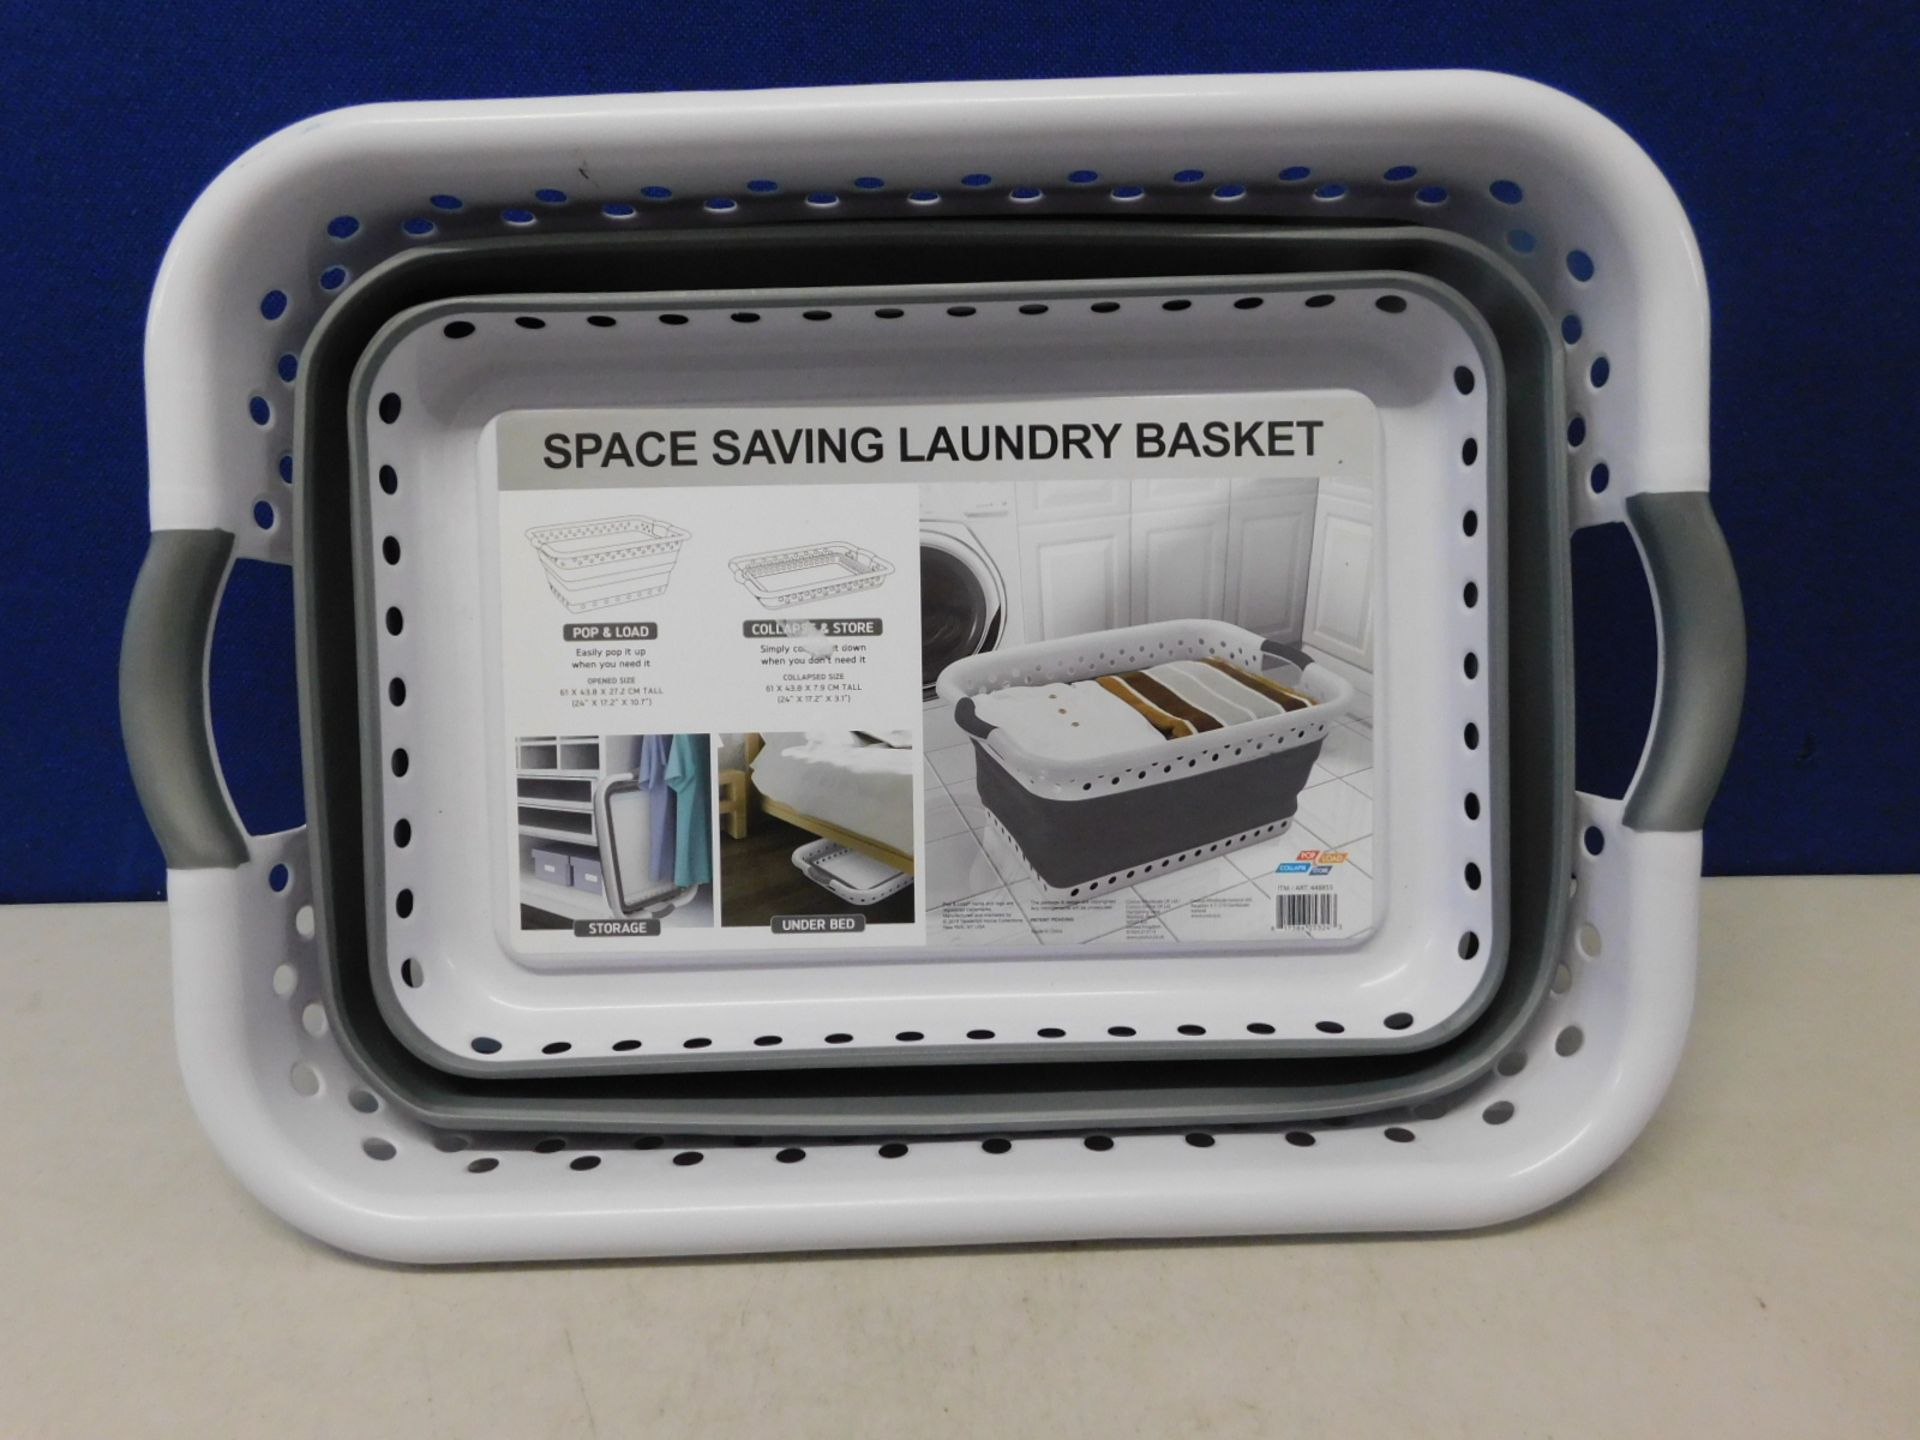 1 POP & LOAD COLLAPSIBLE SPACE SPAVING LAUNDRY BASKET RRP Â£34.99